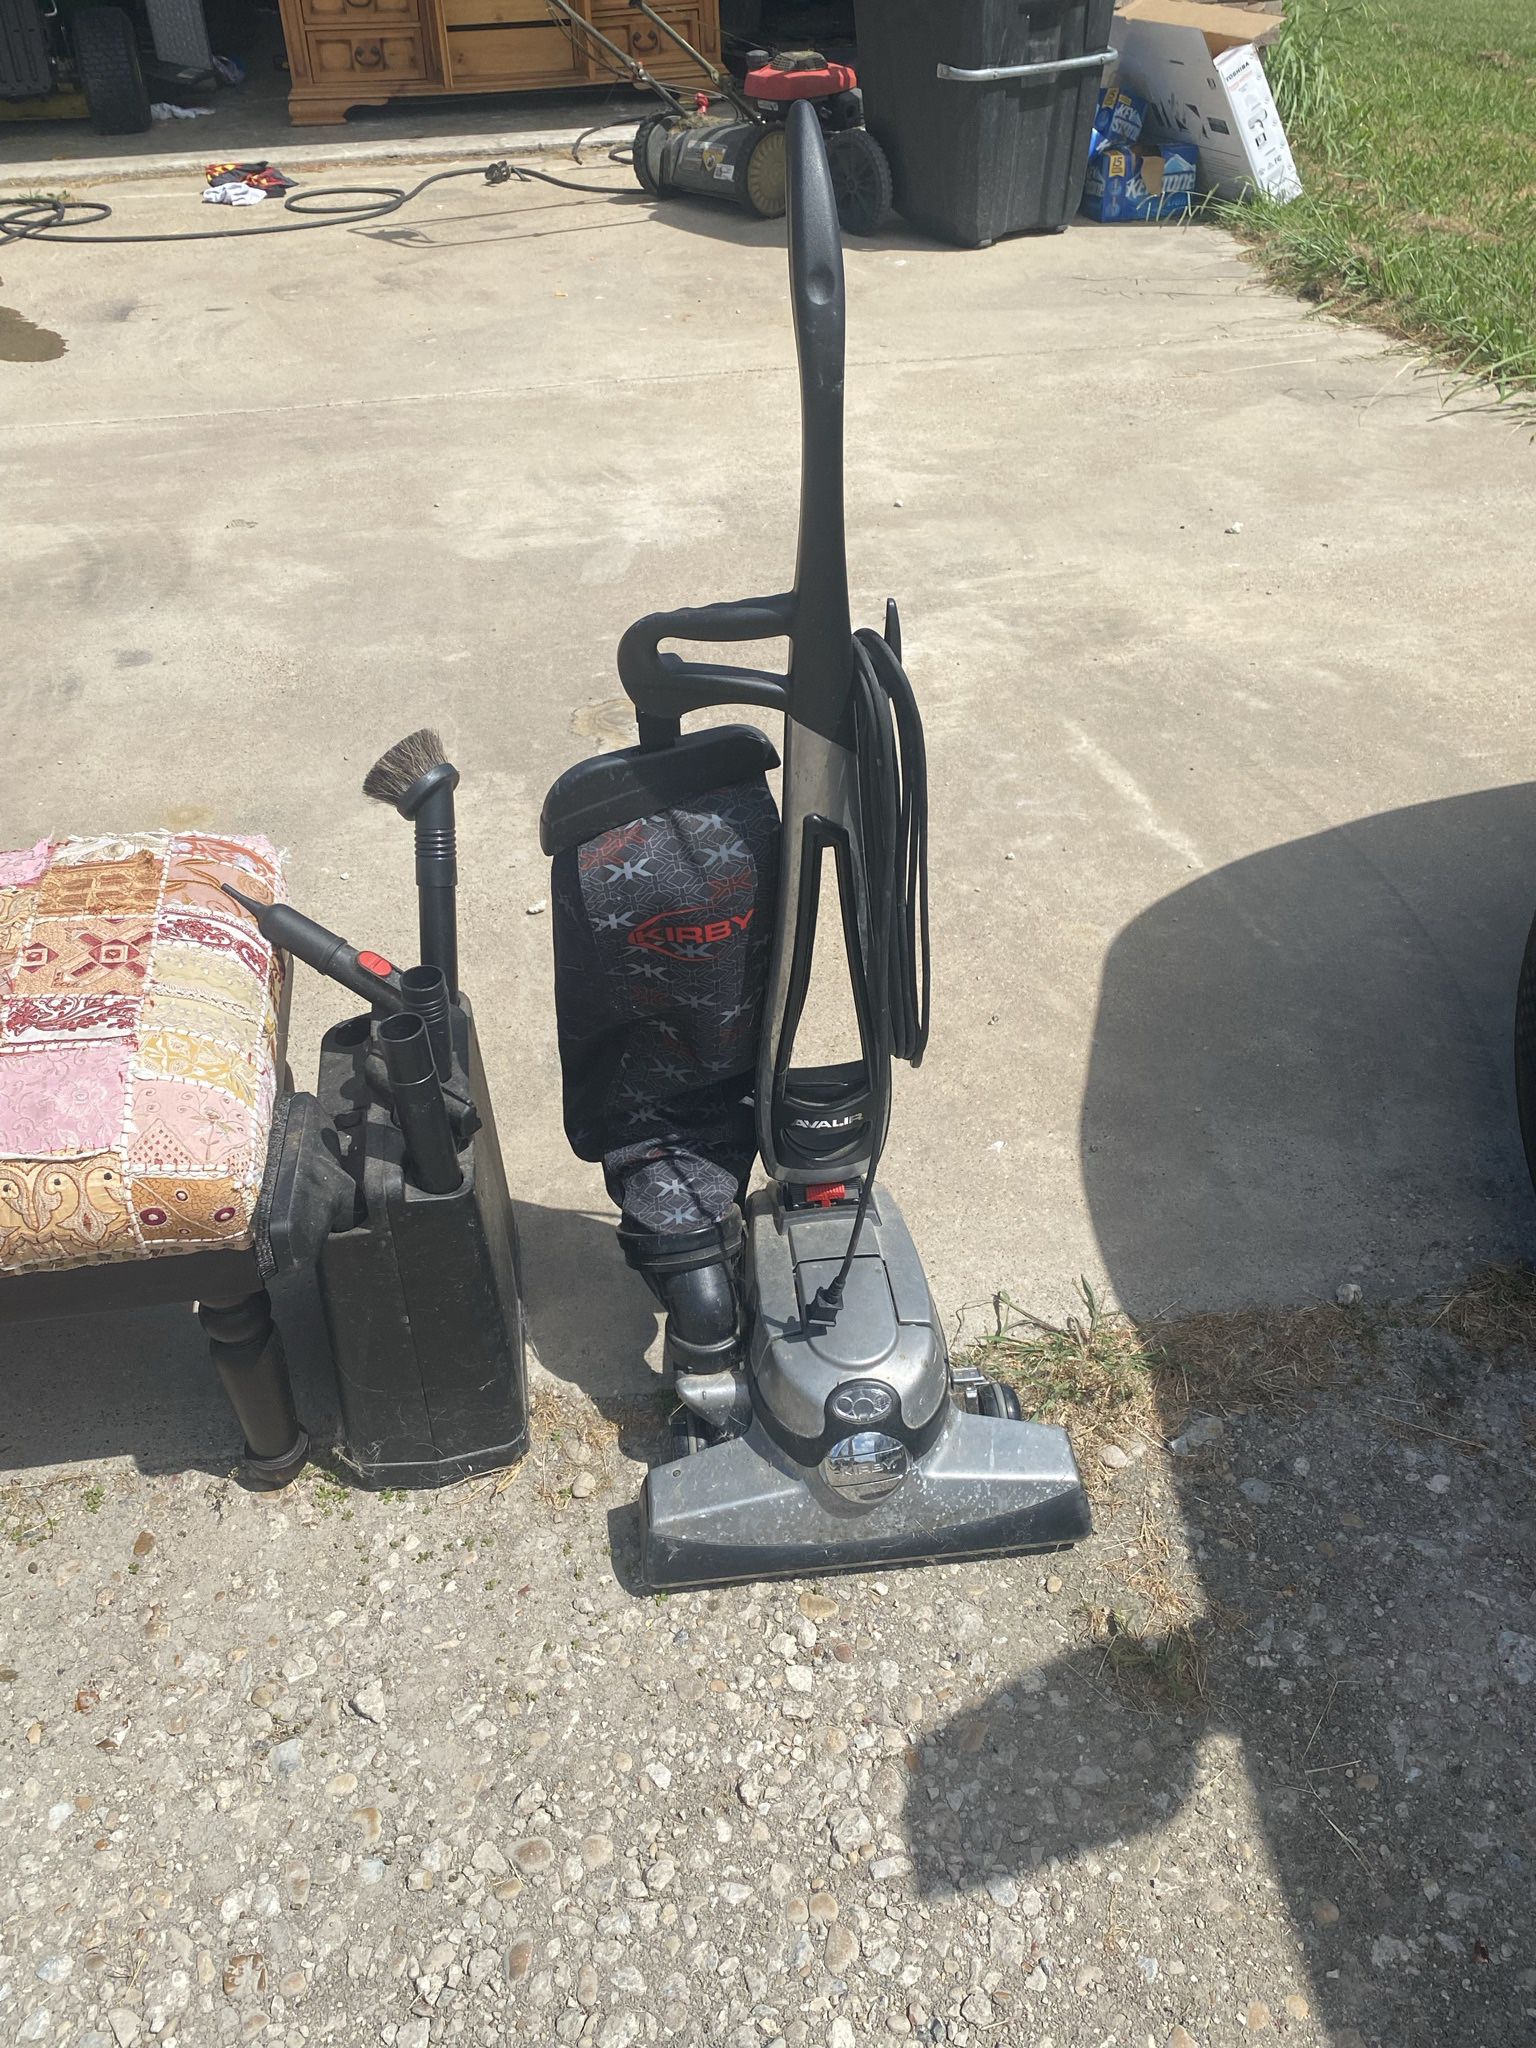 Kirby Carpet Cleaner $100 Decrease From $350